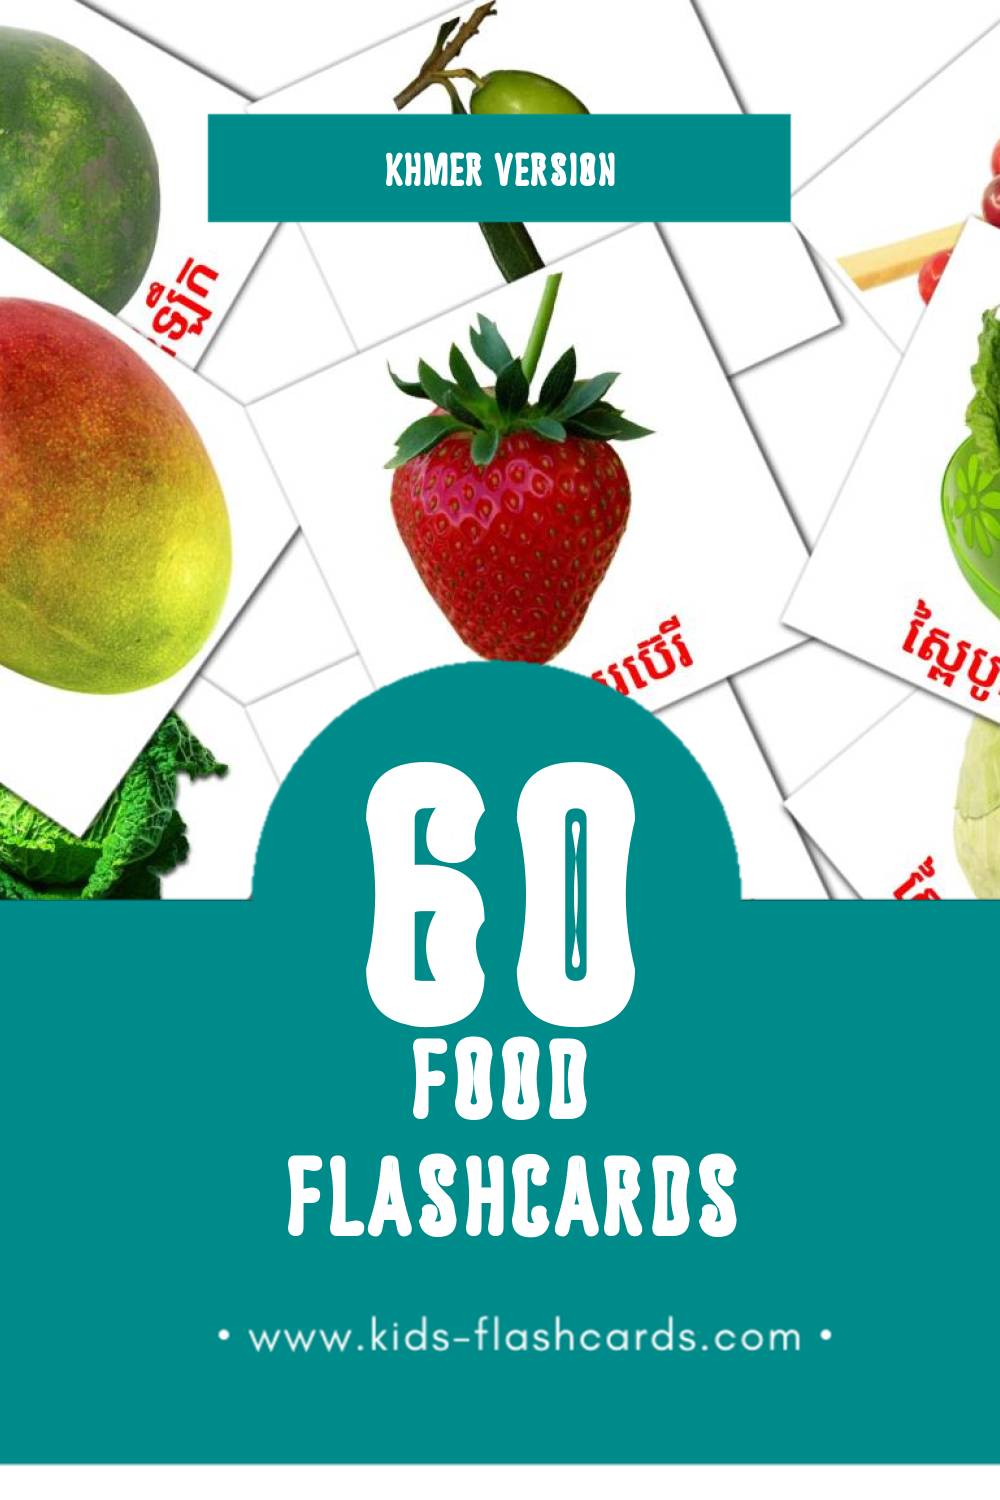 Visual អាហារ Flashcards for Toddlers (20 cards in Khmer)